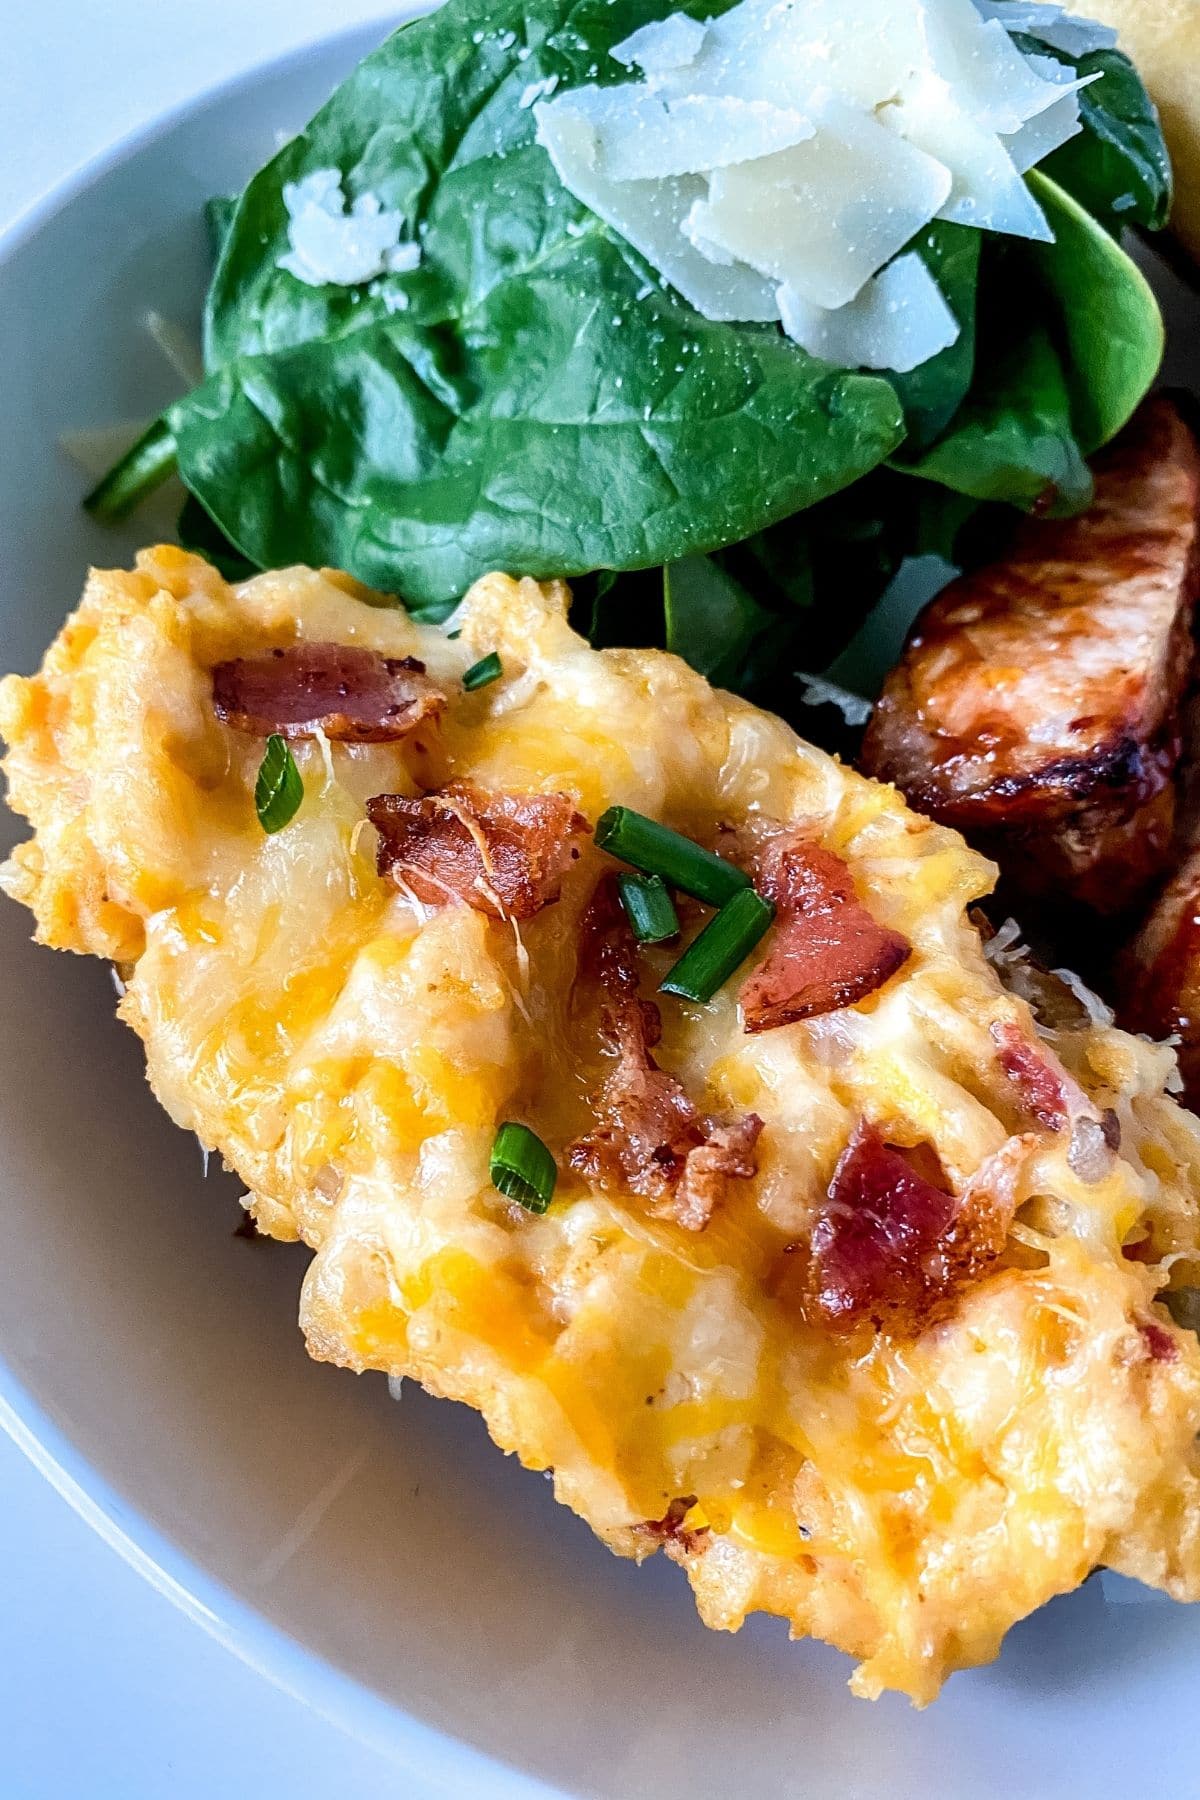 twice baked potato with bacon on top on plate with salad